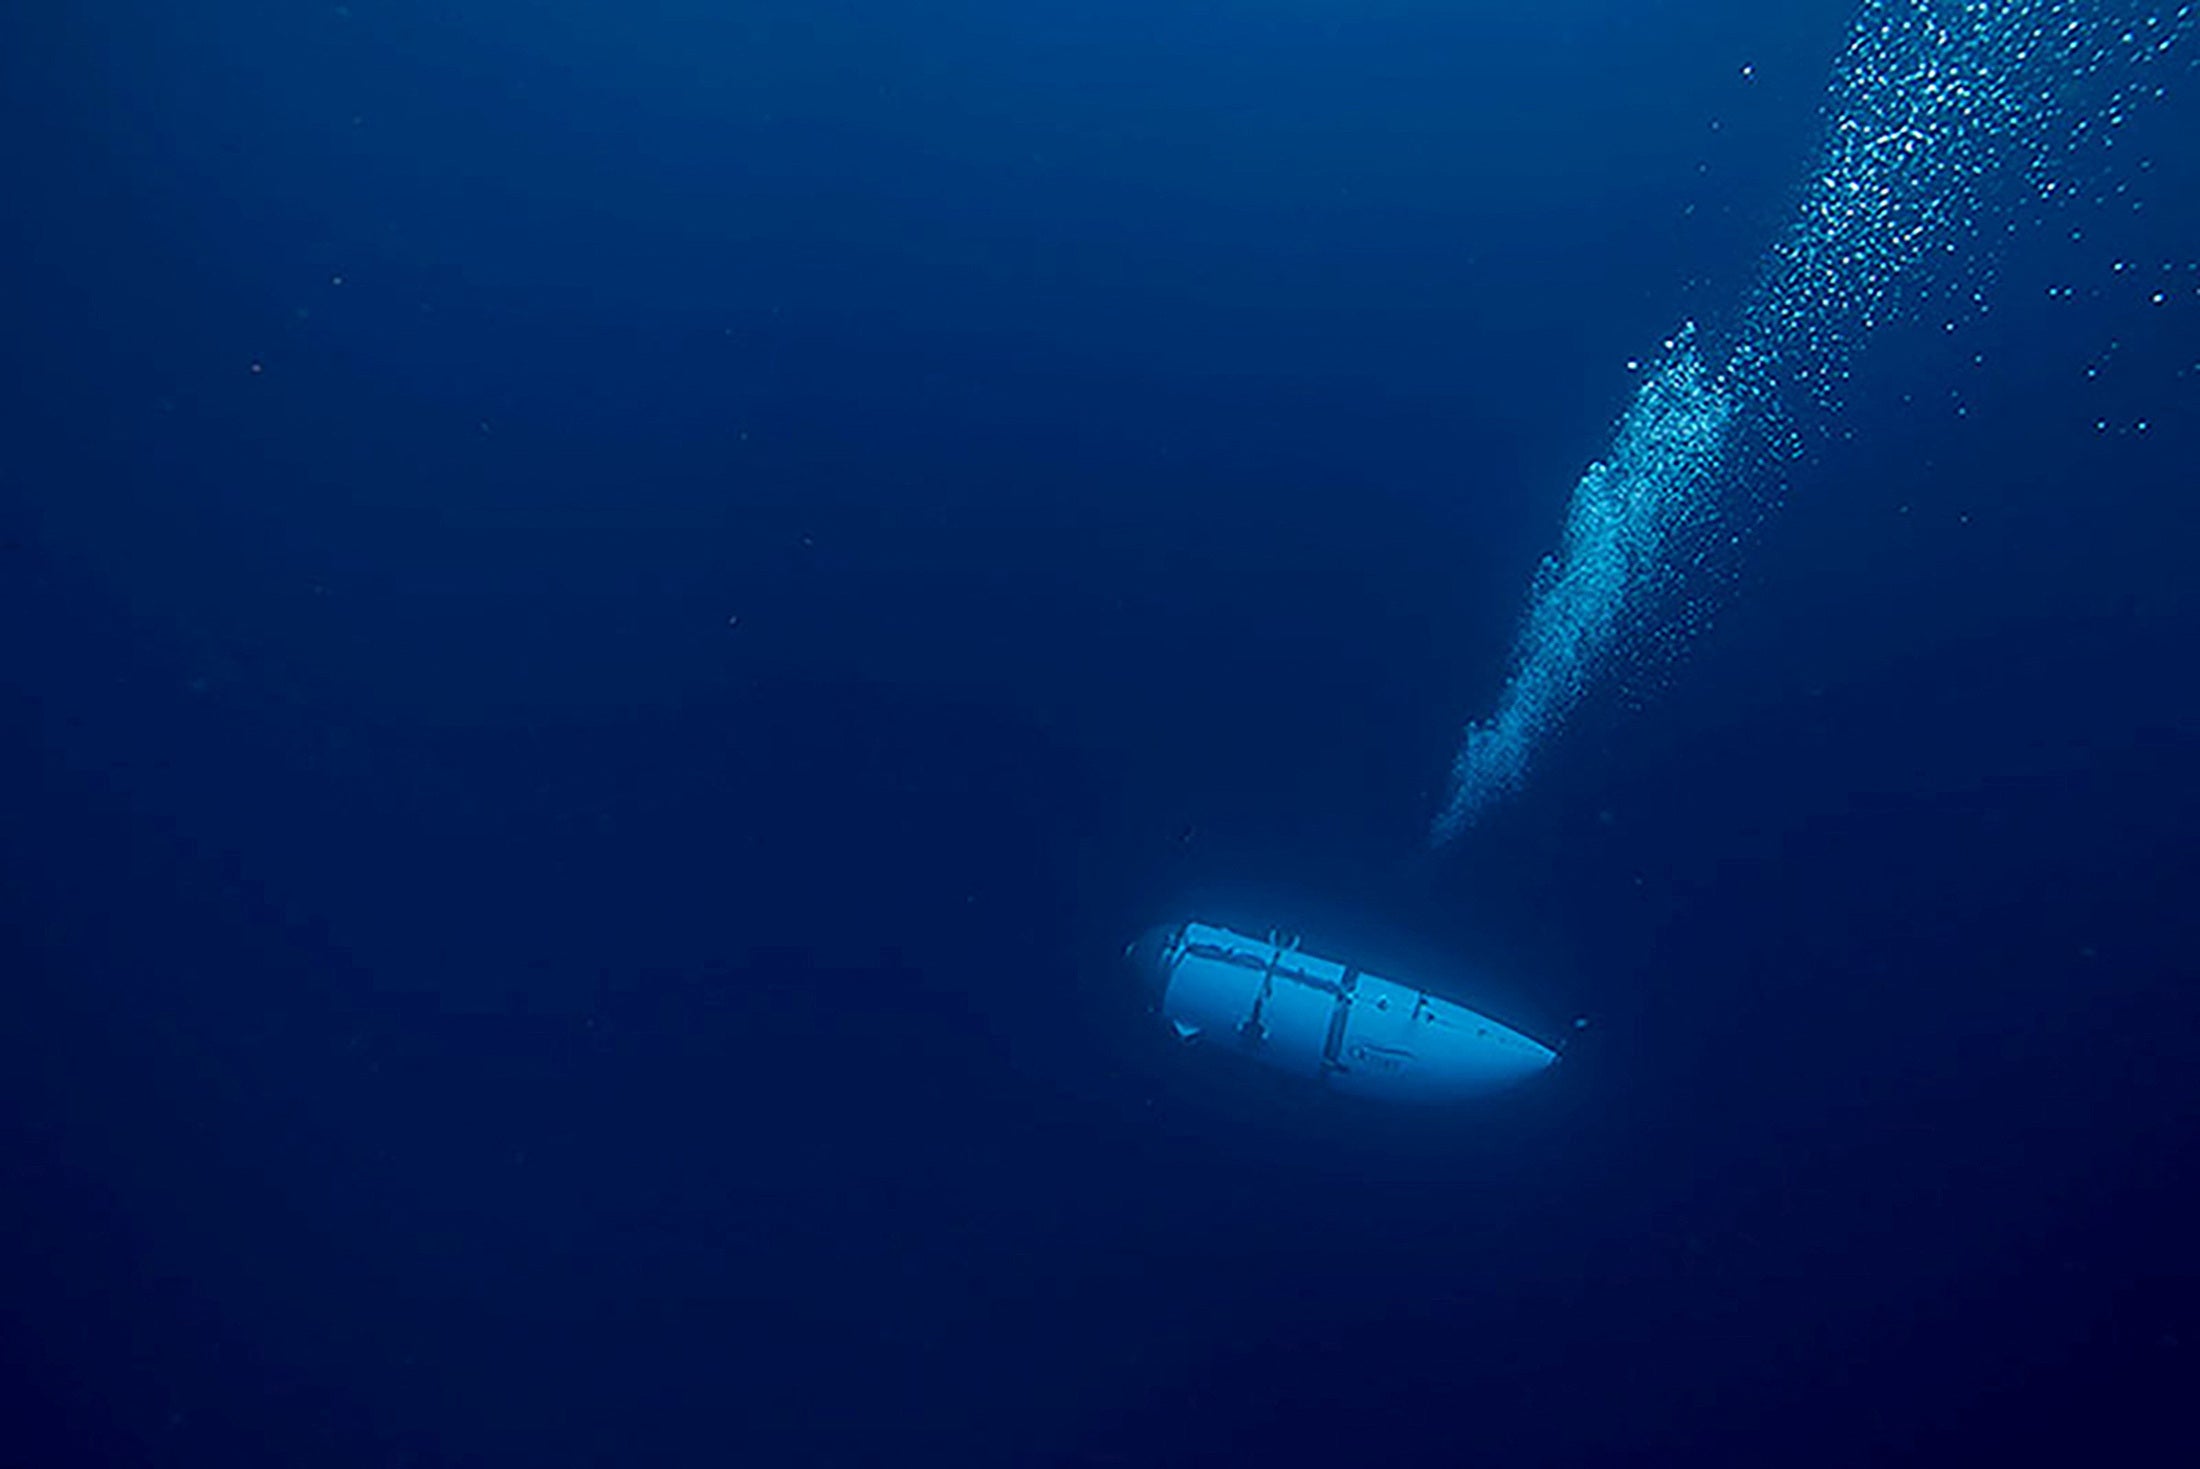 The Titan submersible, operated by OceanGate Expeditions to explore the wreckage of the sunken SS Titanic off the coast of Newfoundland